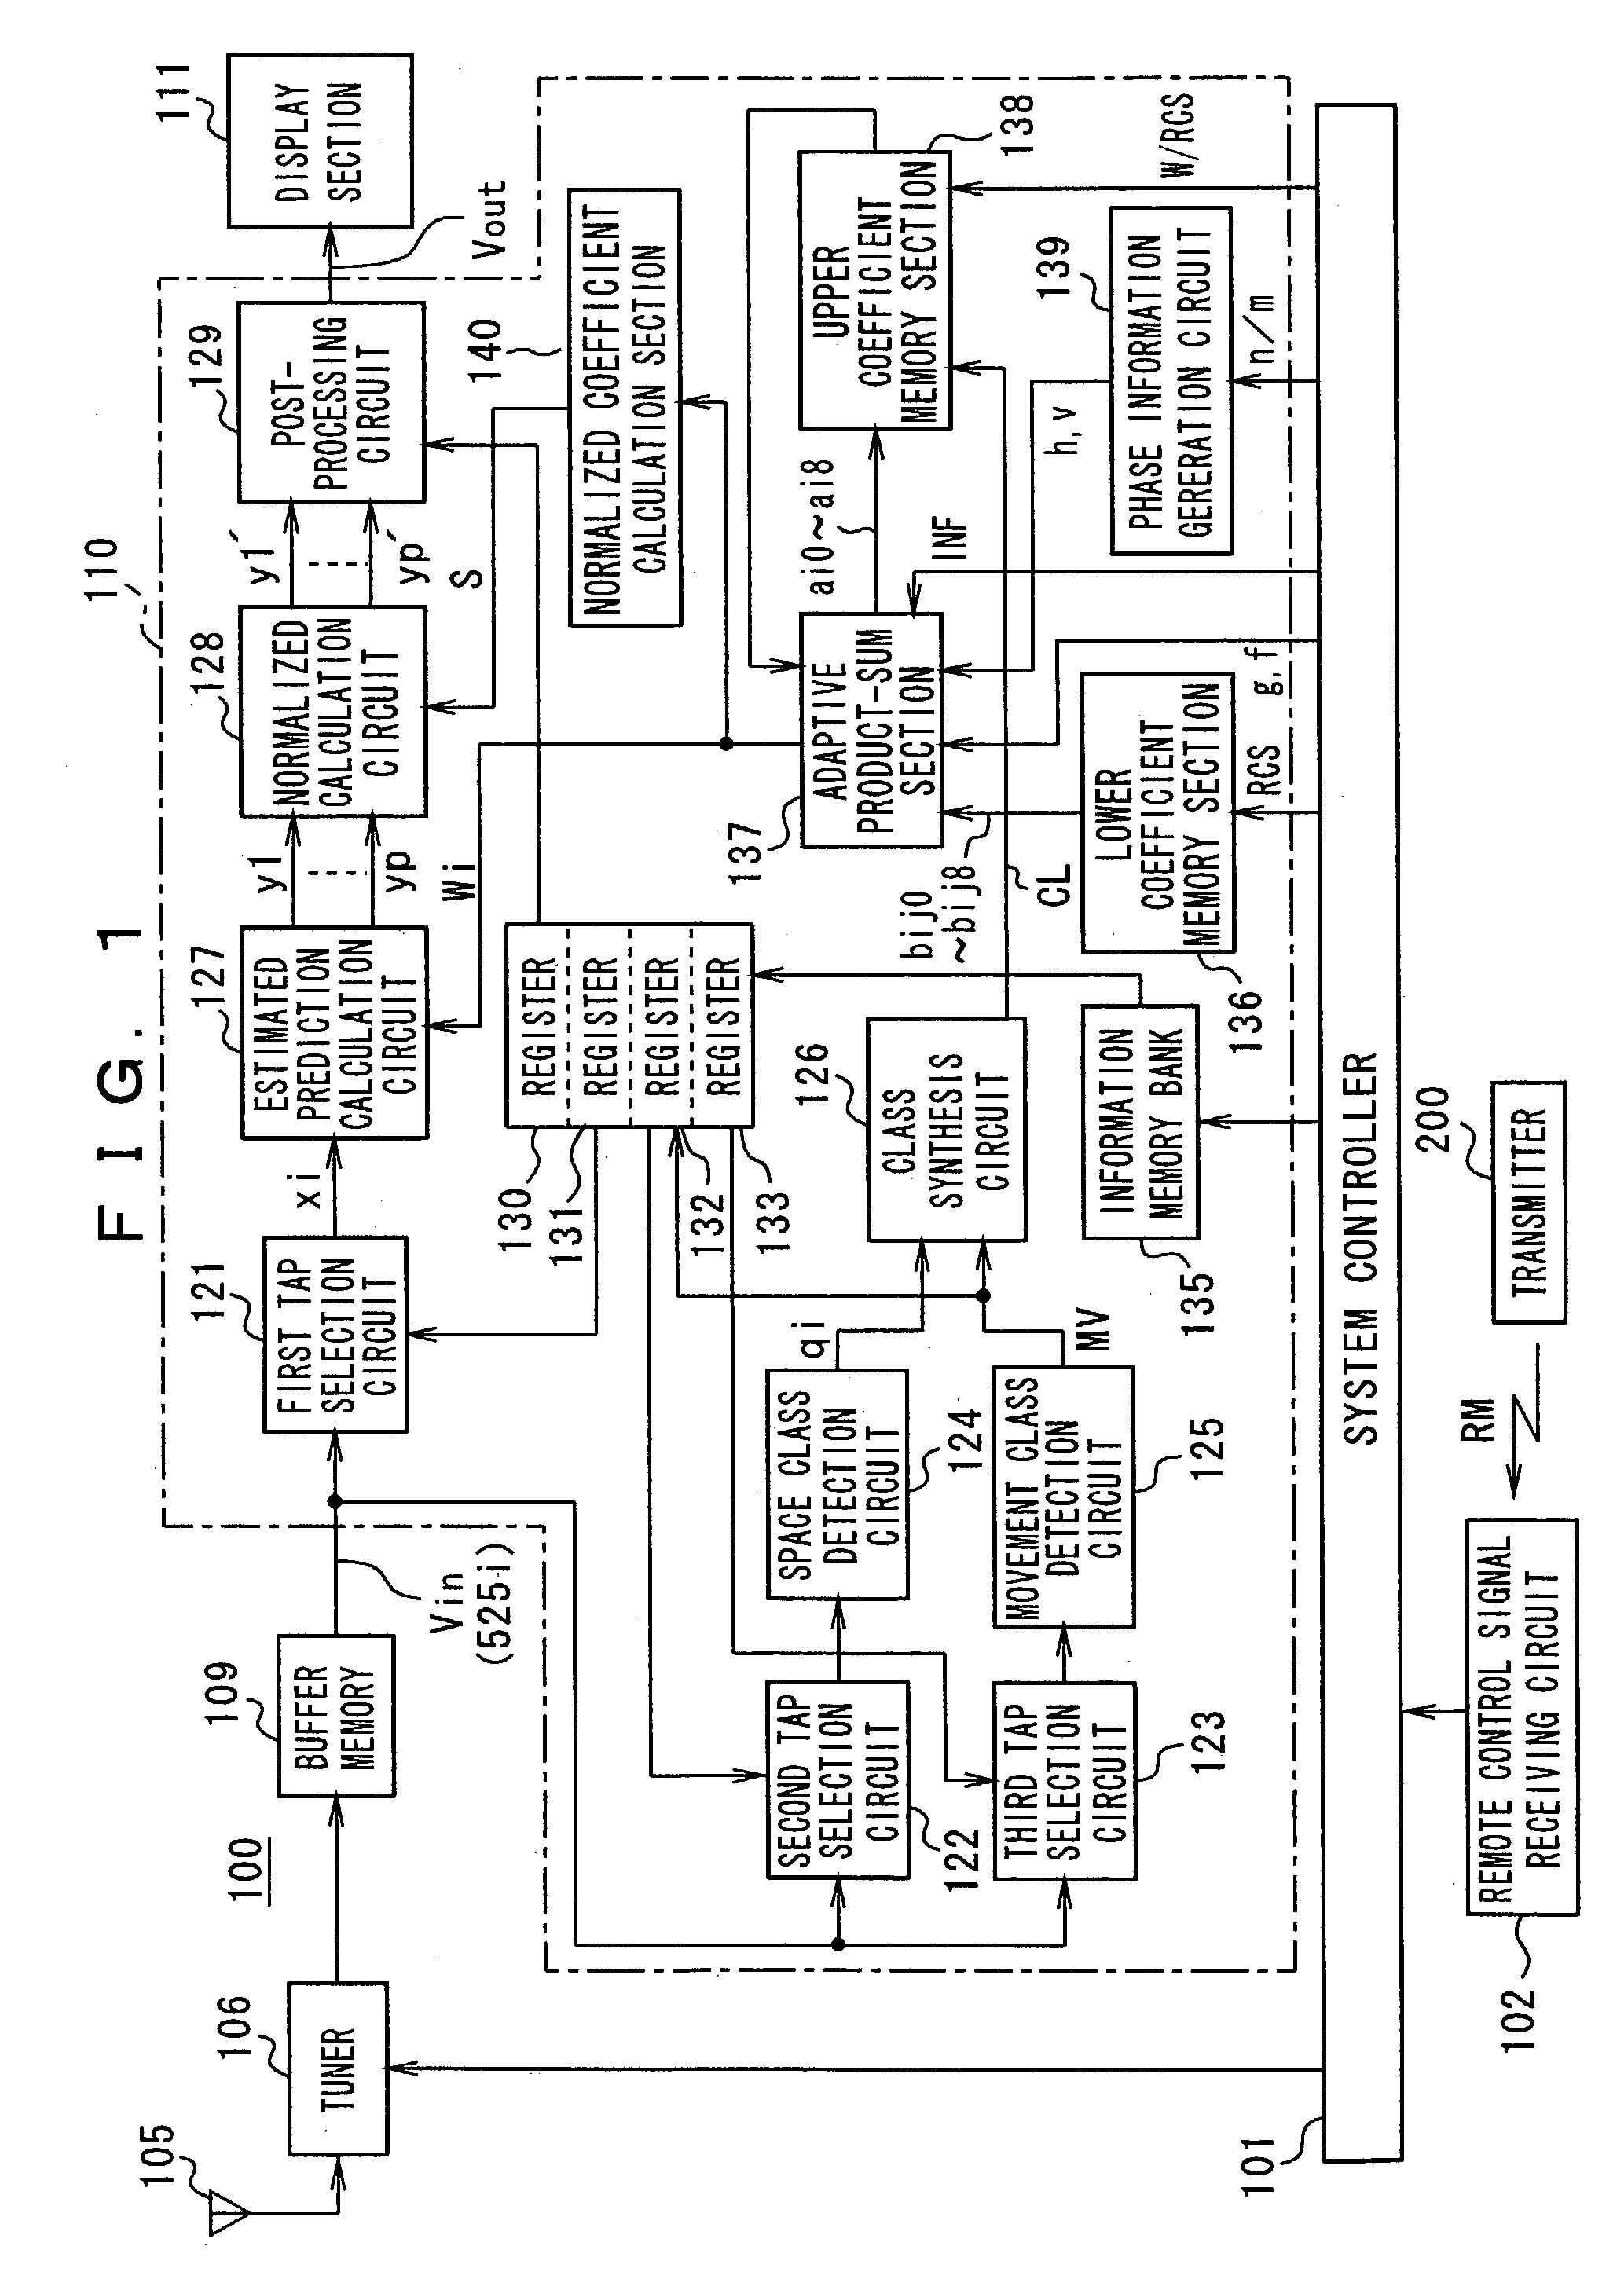 Information signal processing device, information signal processing method, image signal processing device, image signal processing method and image displaying method using it, coefficient kind data generating device and method used therein, and computer readable medium and program